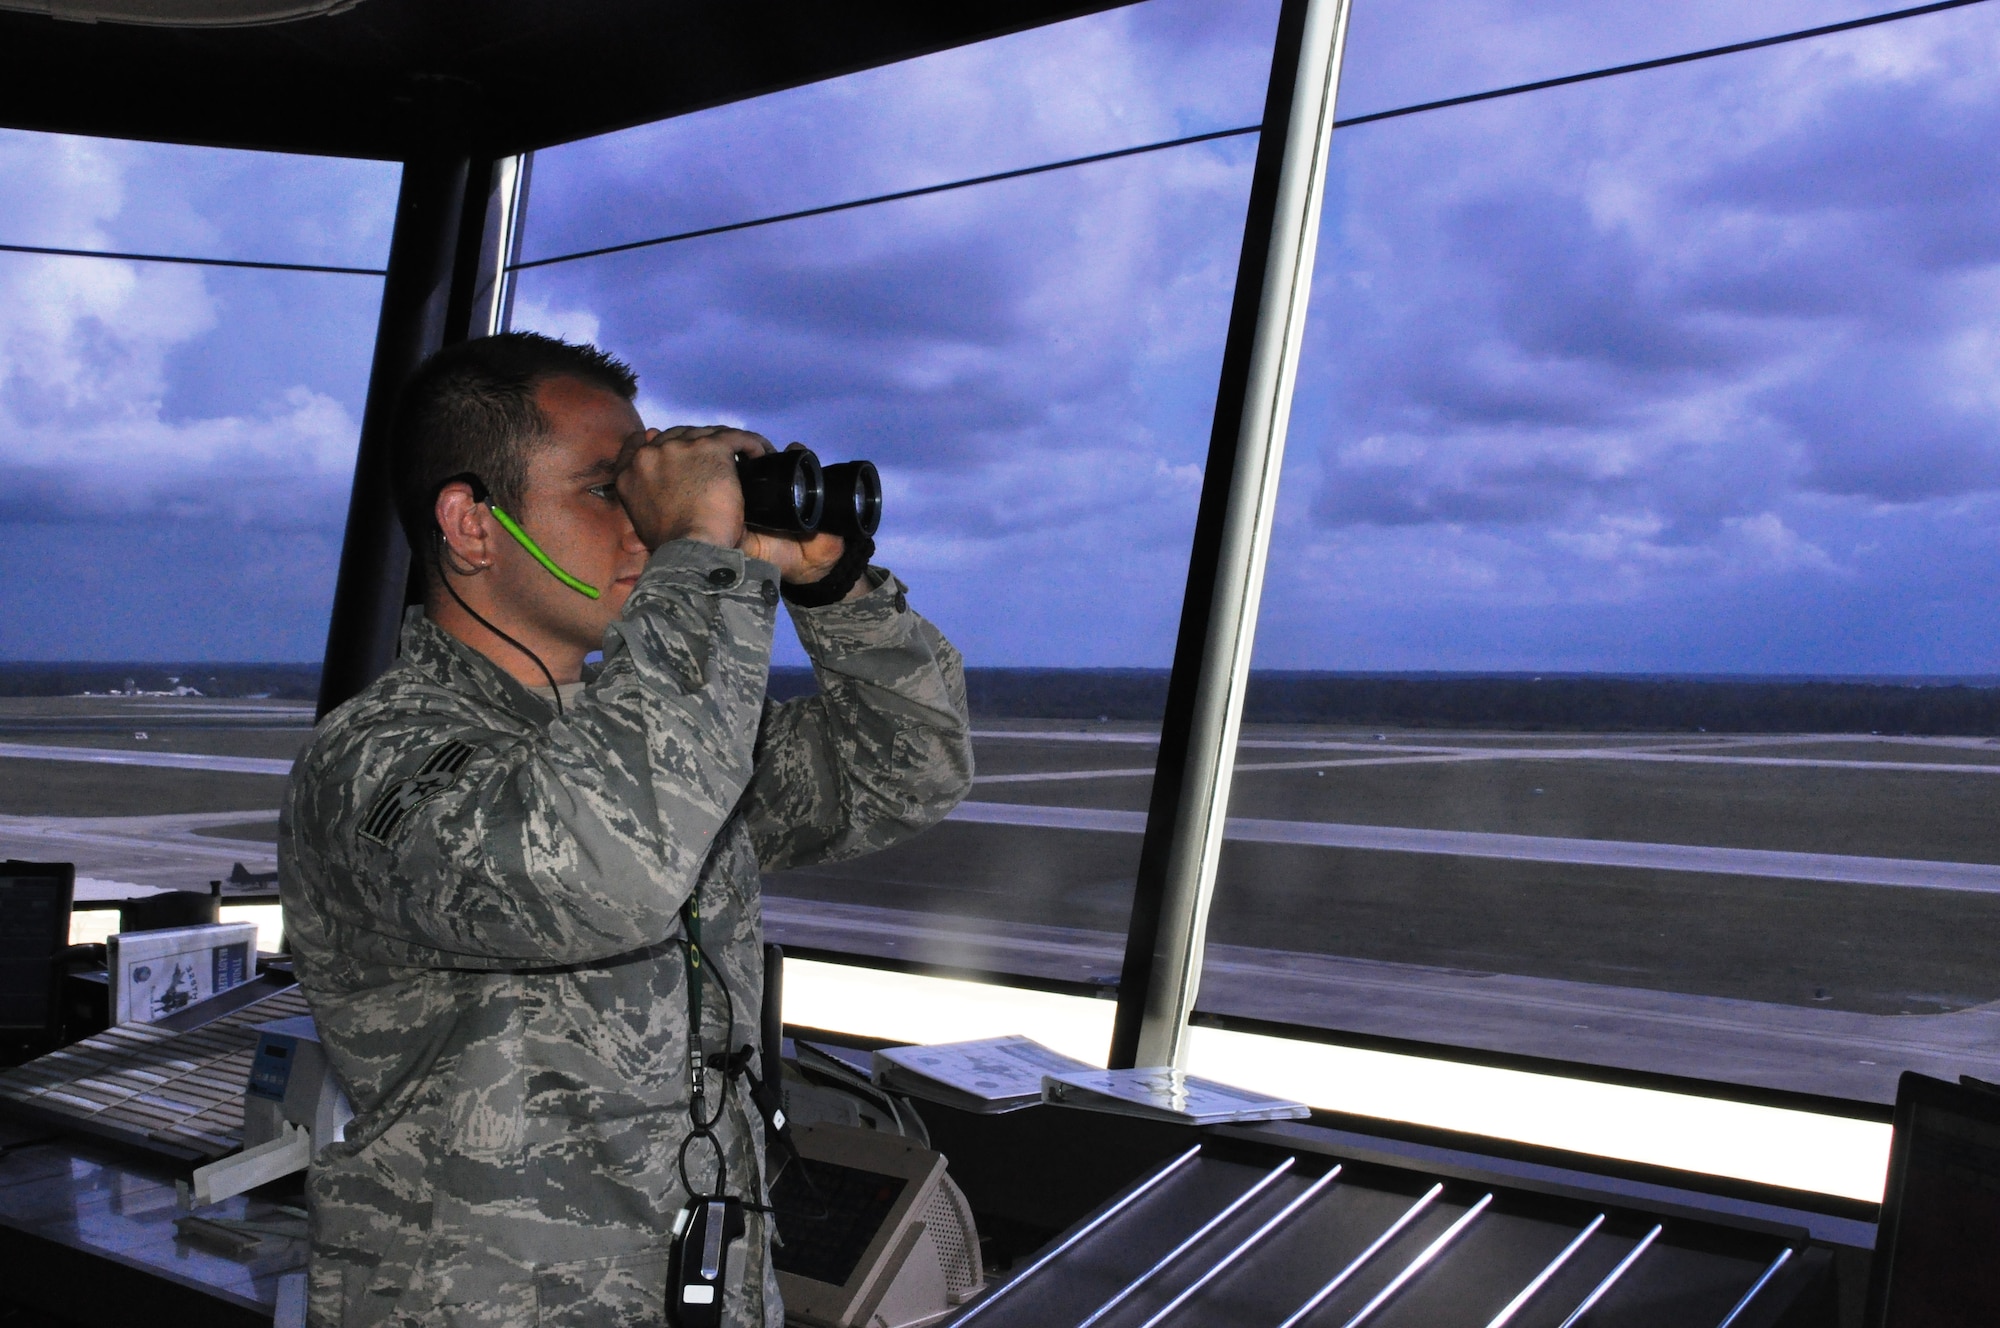 Senior Airman Justin Loranger, 325th OSS air traffic controller, performs some of his duties at the unit’s air traffic control tower. He is the 2012 Air Force Air Traffic Controller award recipient. (U.S. Air Force photo by Senior Airman Christopher Reel) 